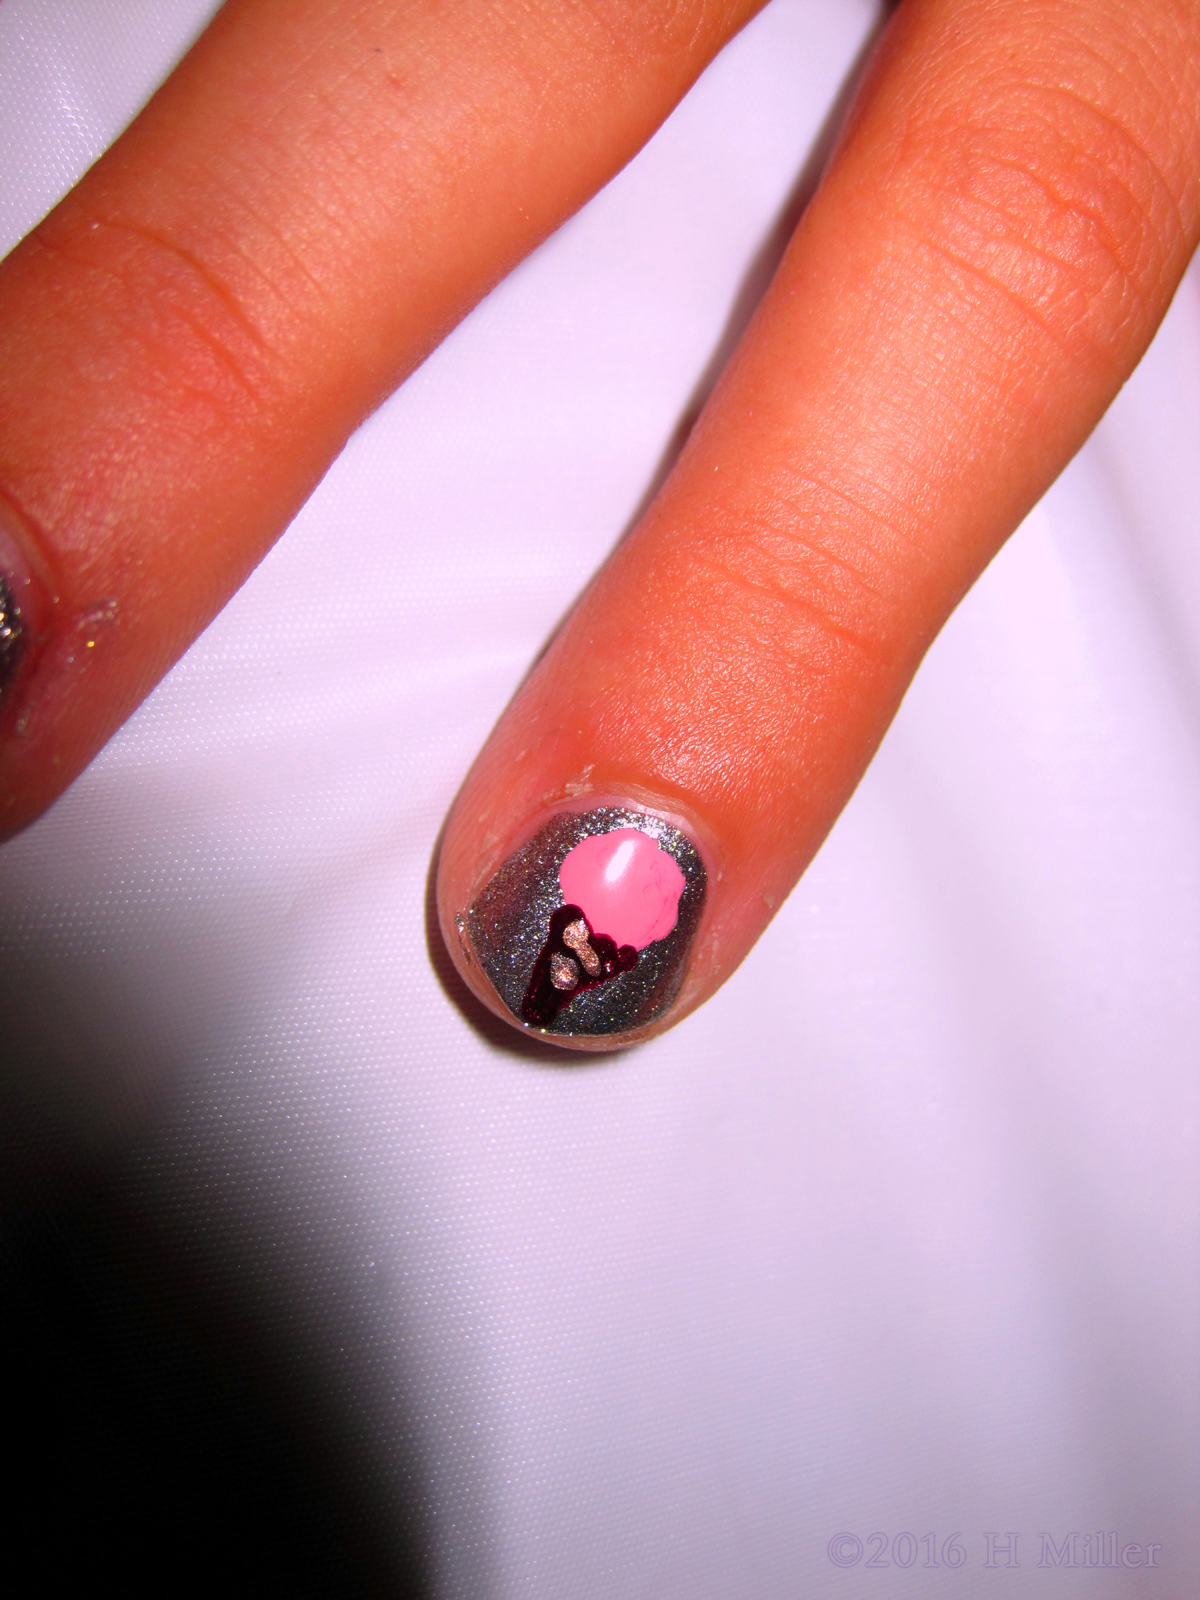 This Ice Cream Nail Design Is Super Awesome! 